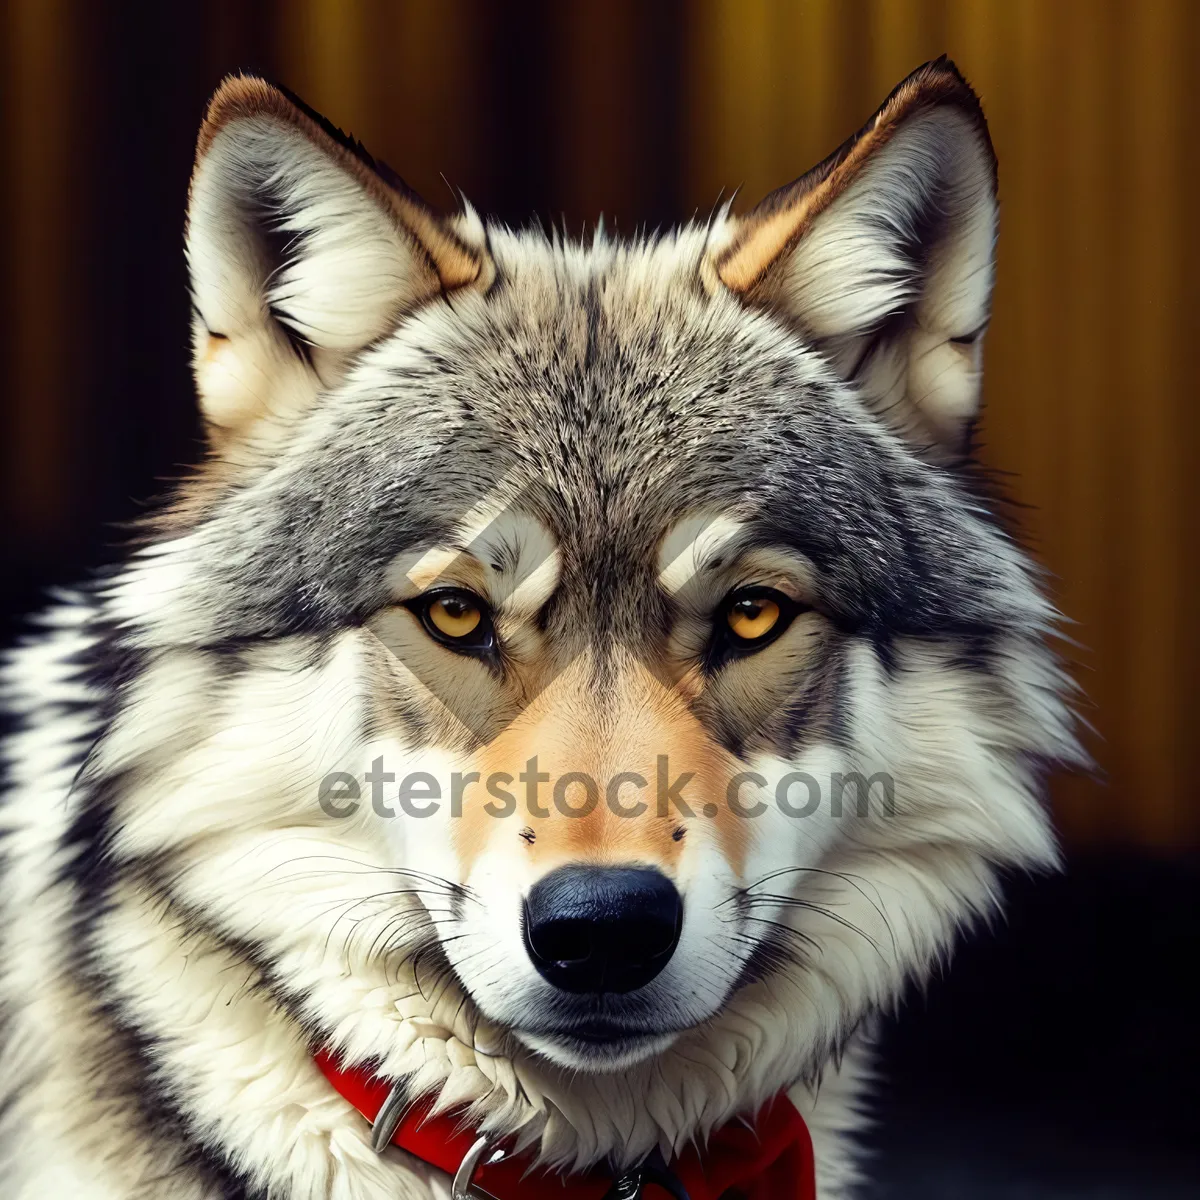 Picture of Majestic Timber Wolf: Wild Canine With Piercing Eyes